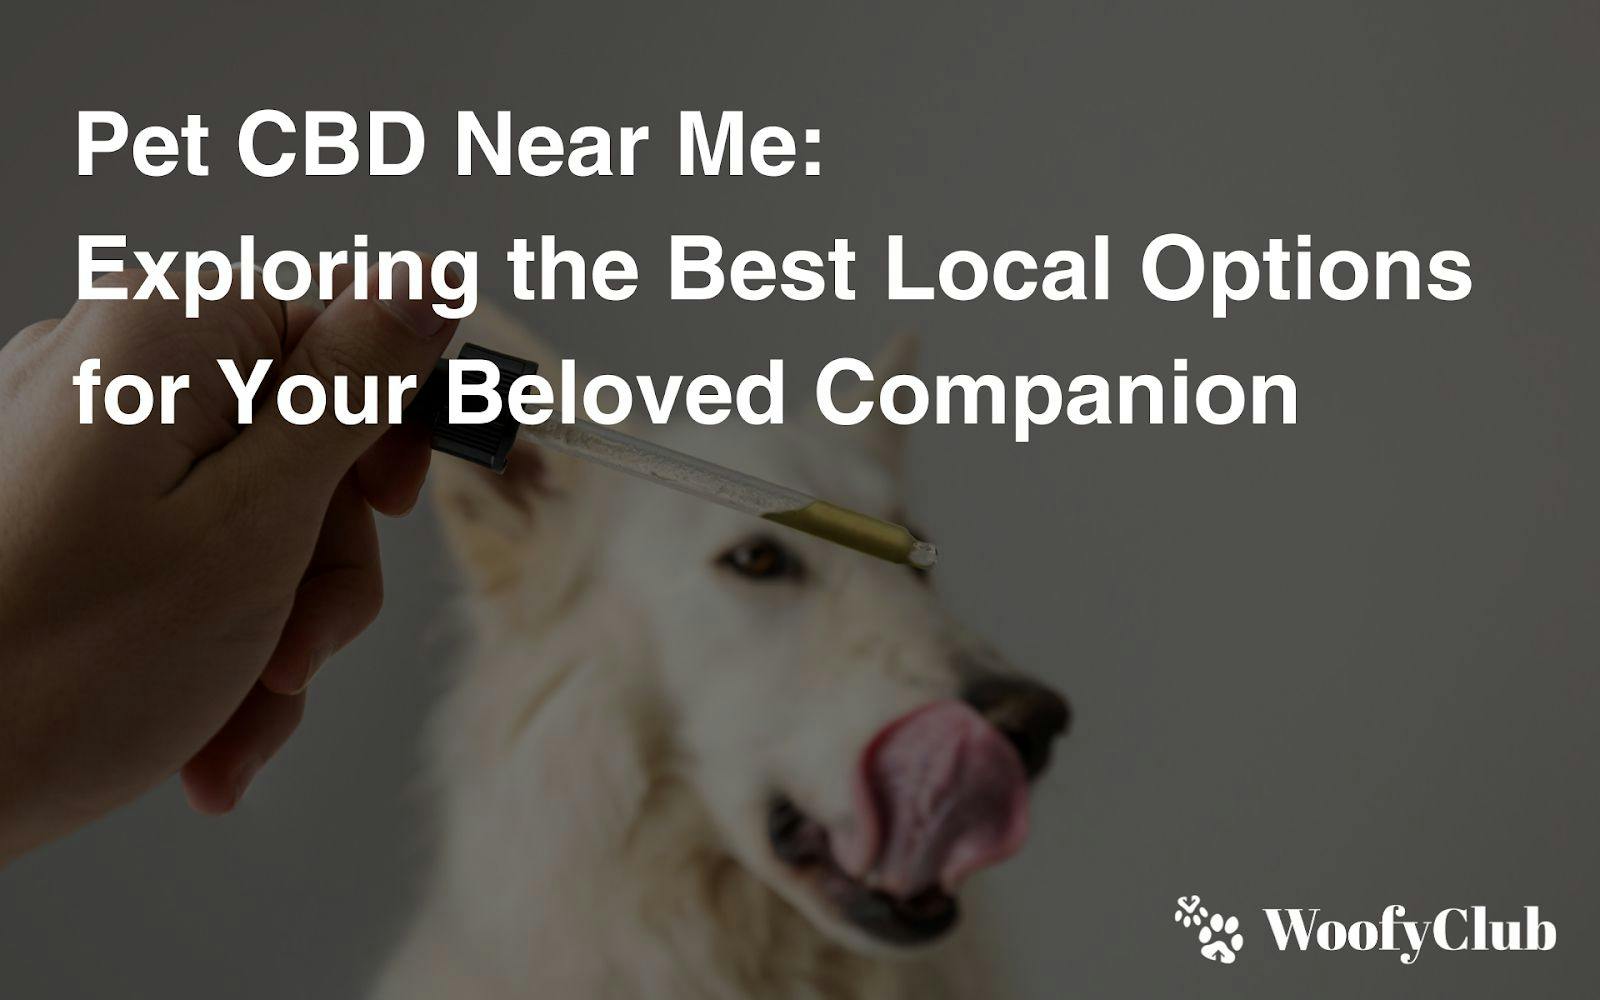 Pet CBD Near Me: Exploring The Best Local Options For Your Beloved Companion